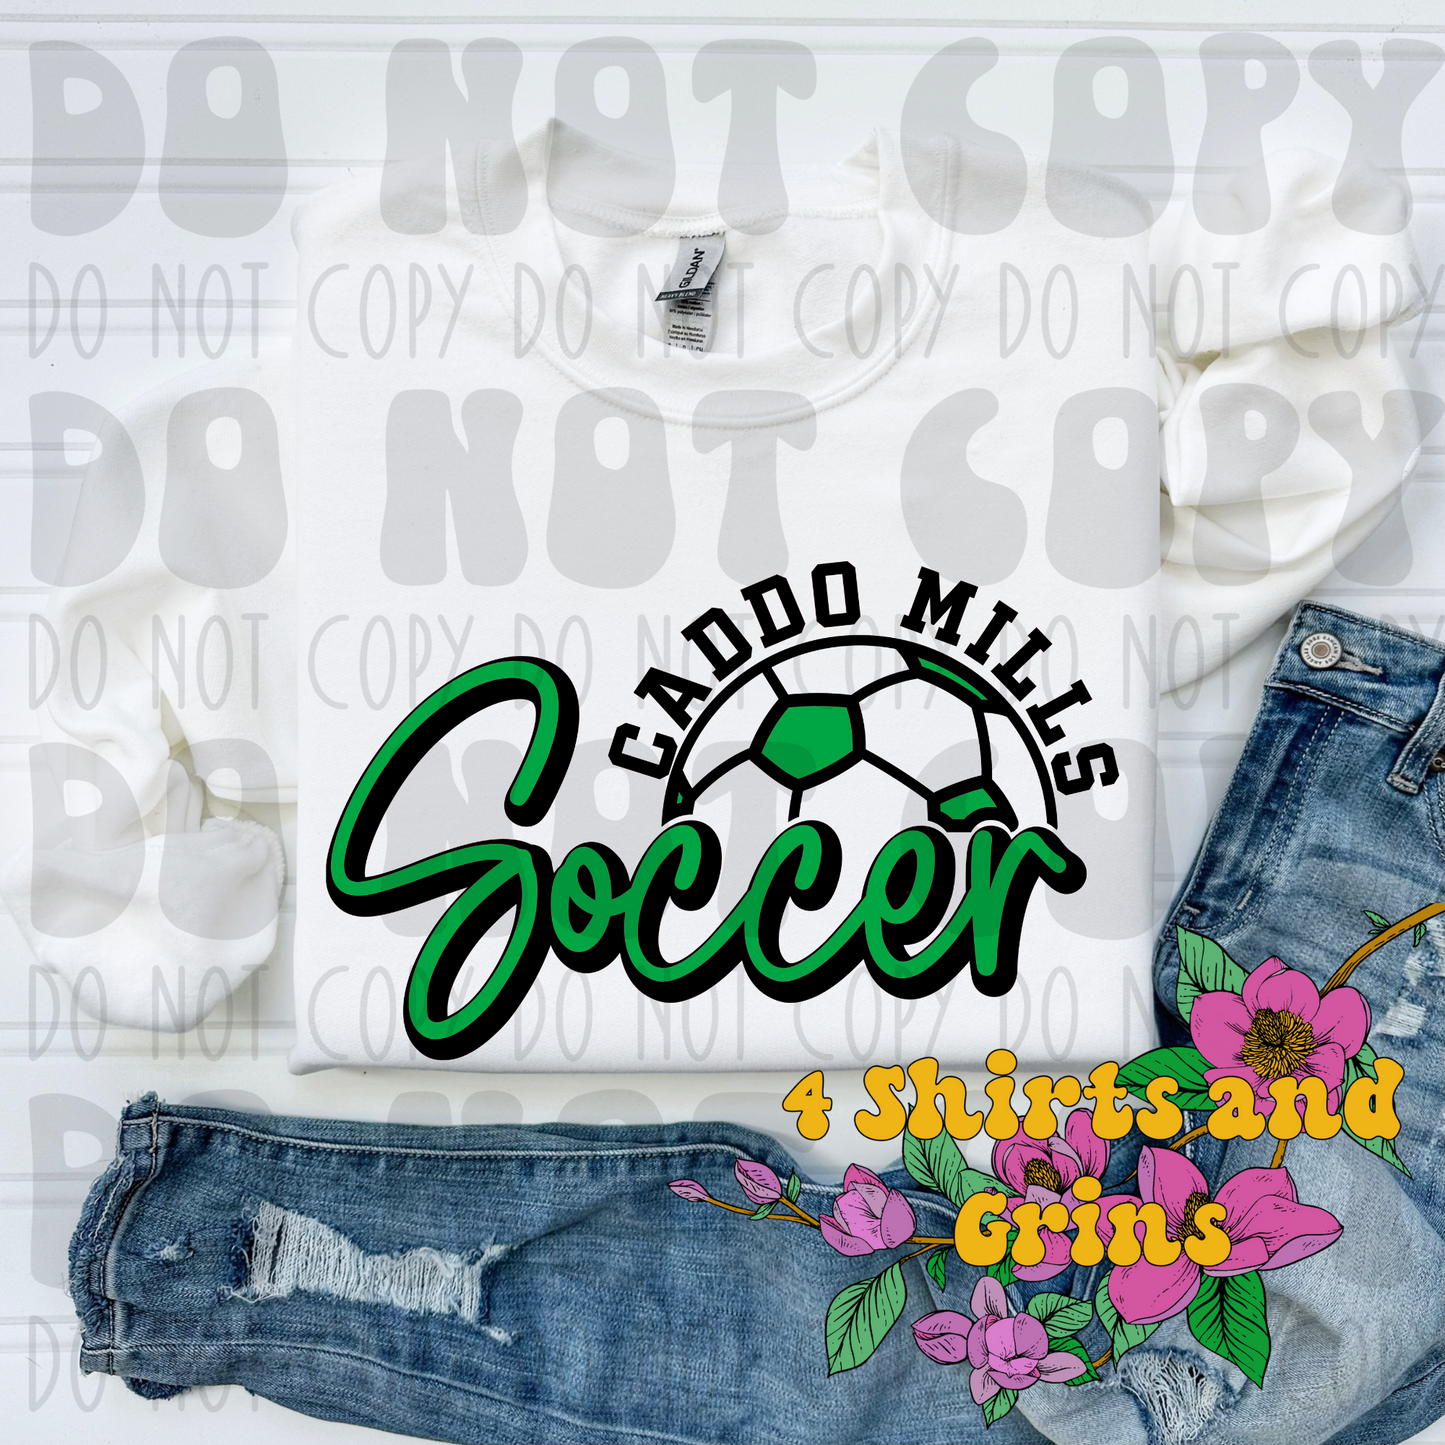 Caddo Mills Soccer - Youth Sizes